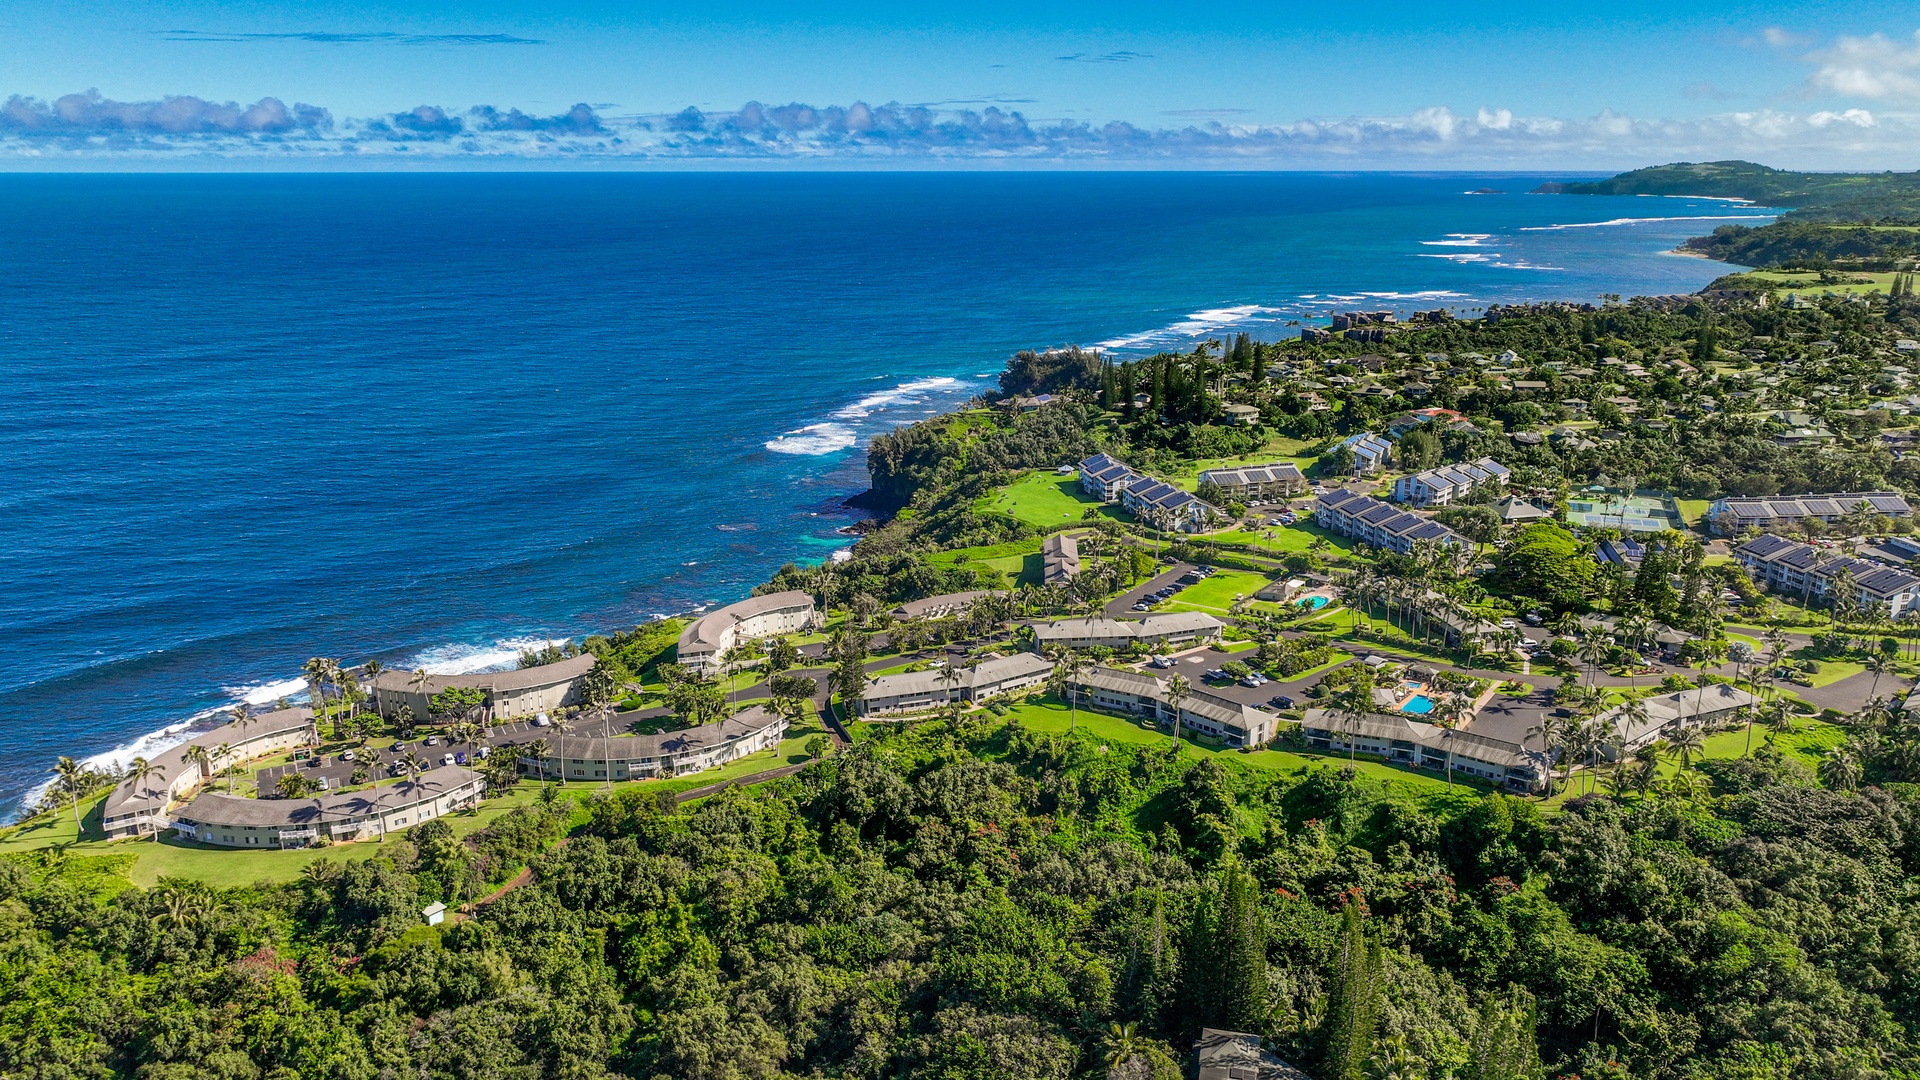 Princeville Vacation Rentals, Alii Kai 7201 - Aerial shot of the area.